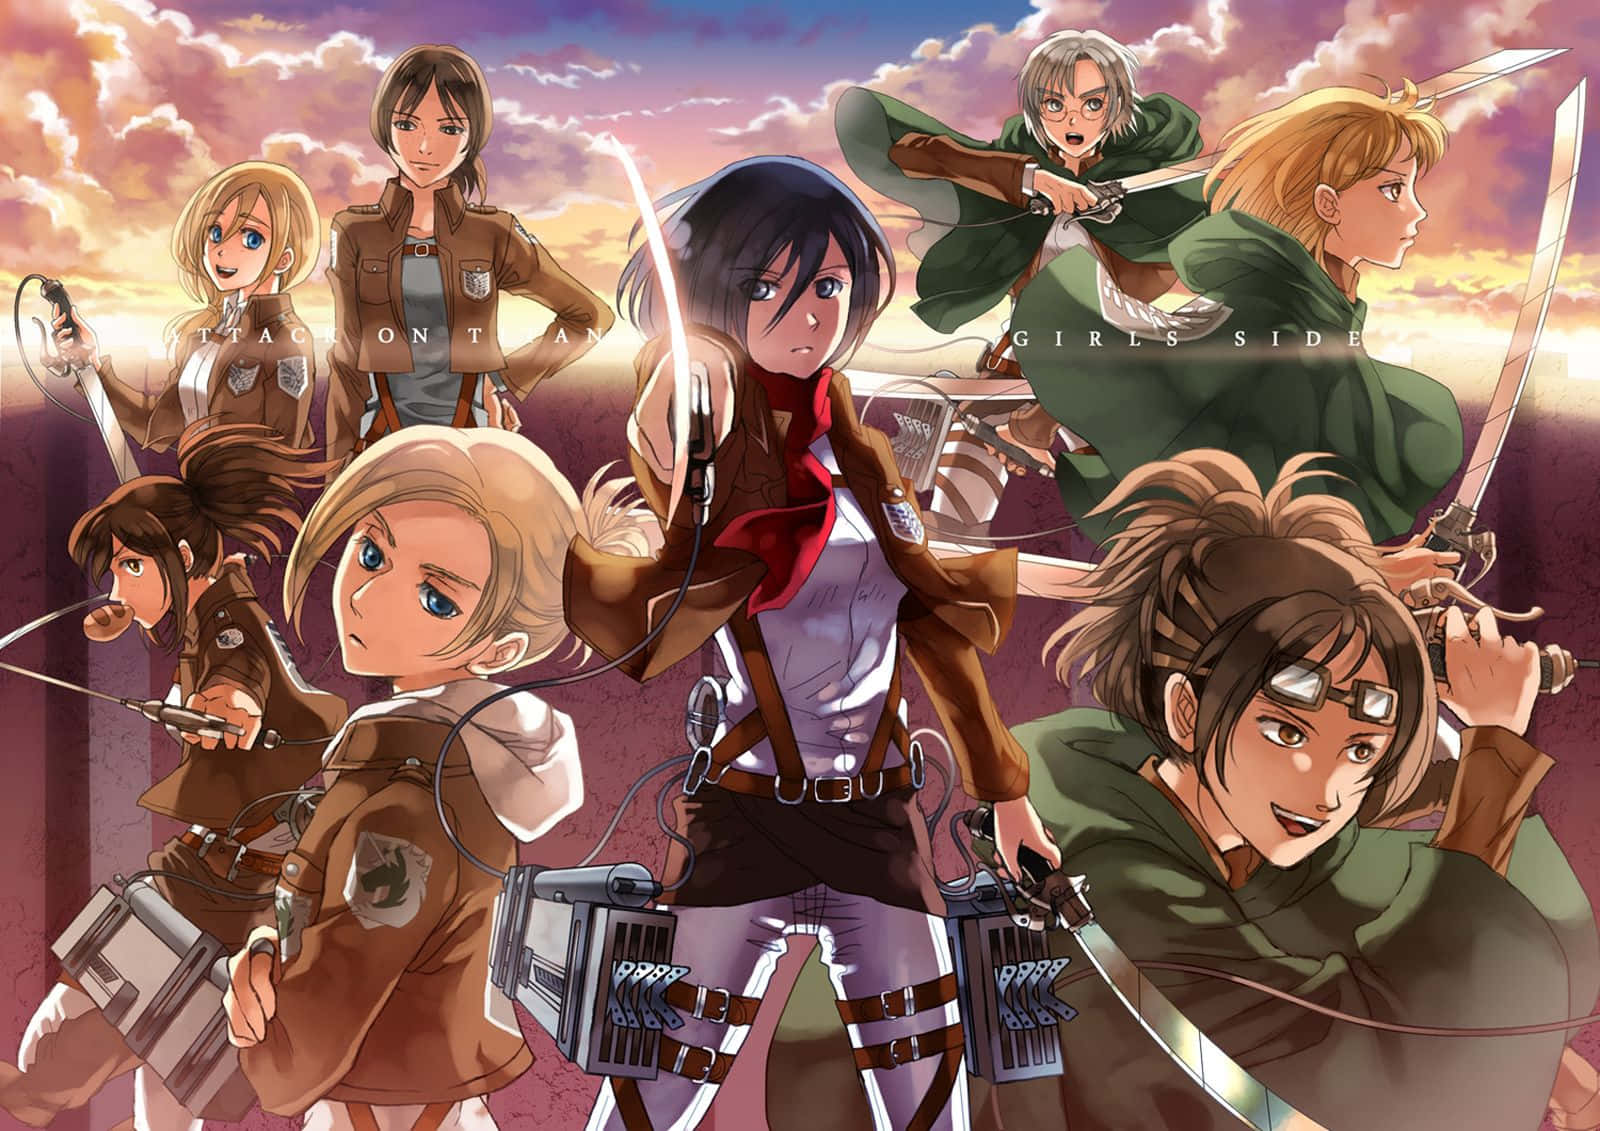 Mikasa Ackerman of the Survey Corps protects her allies